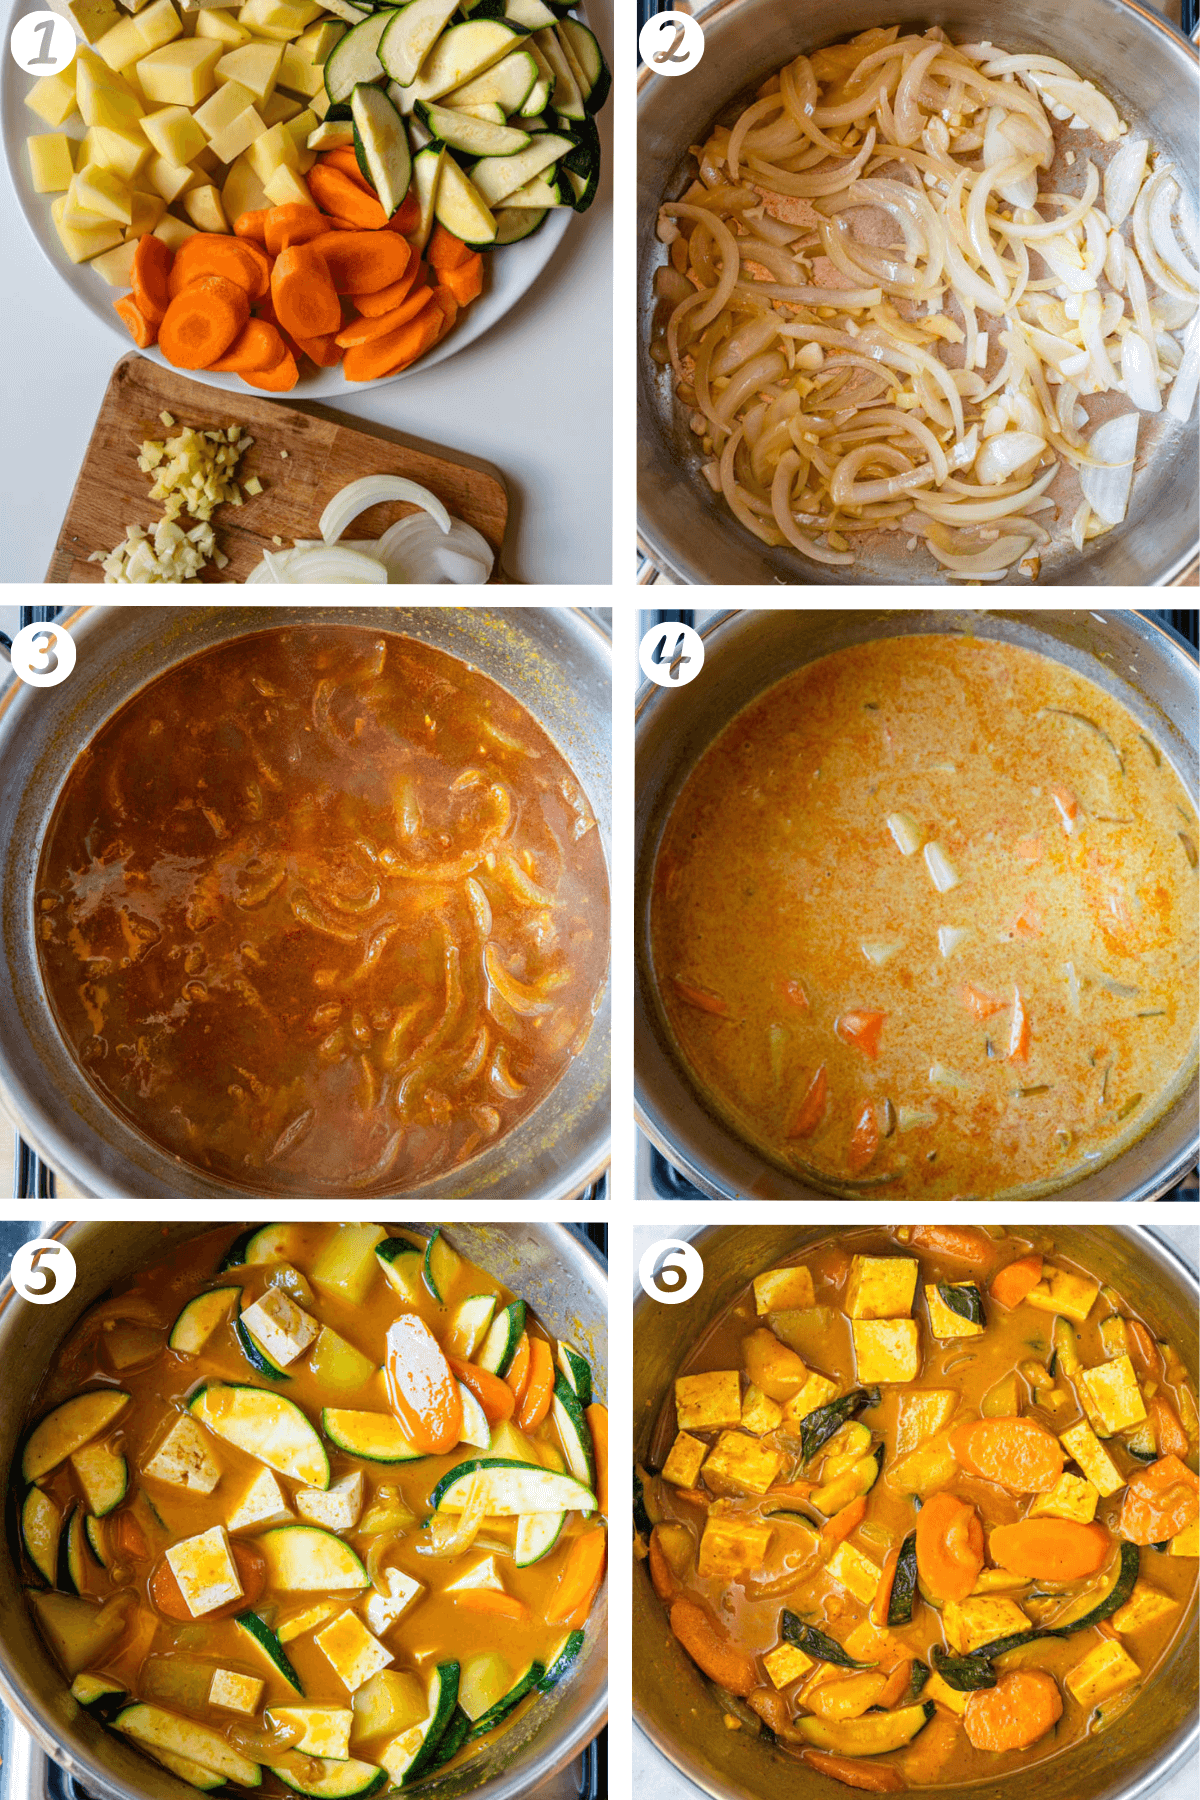 Steps on how to make a thai yellow curry vegan